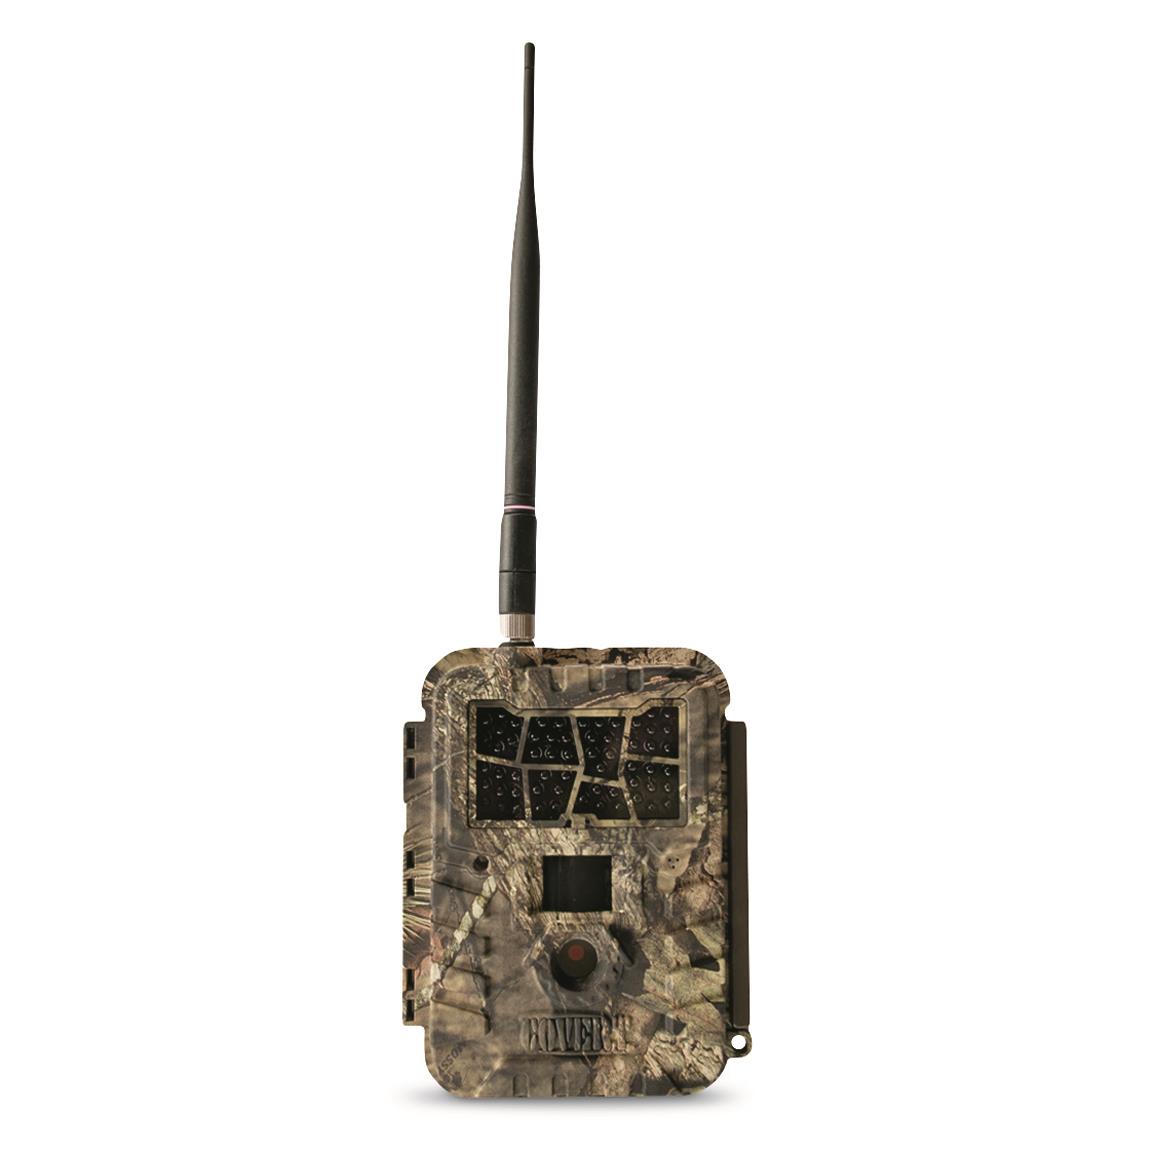 Covert Scouting Code Black 12.1 AT&T Certified Wireless Trail/Game Camera